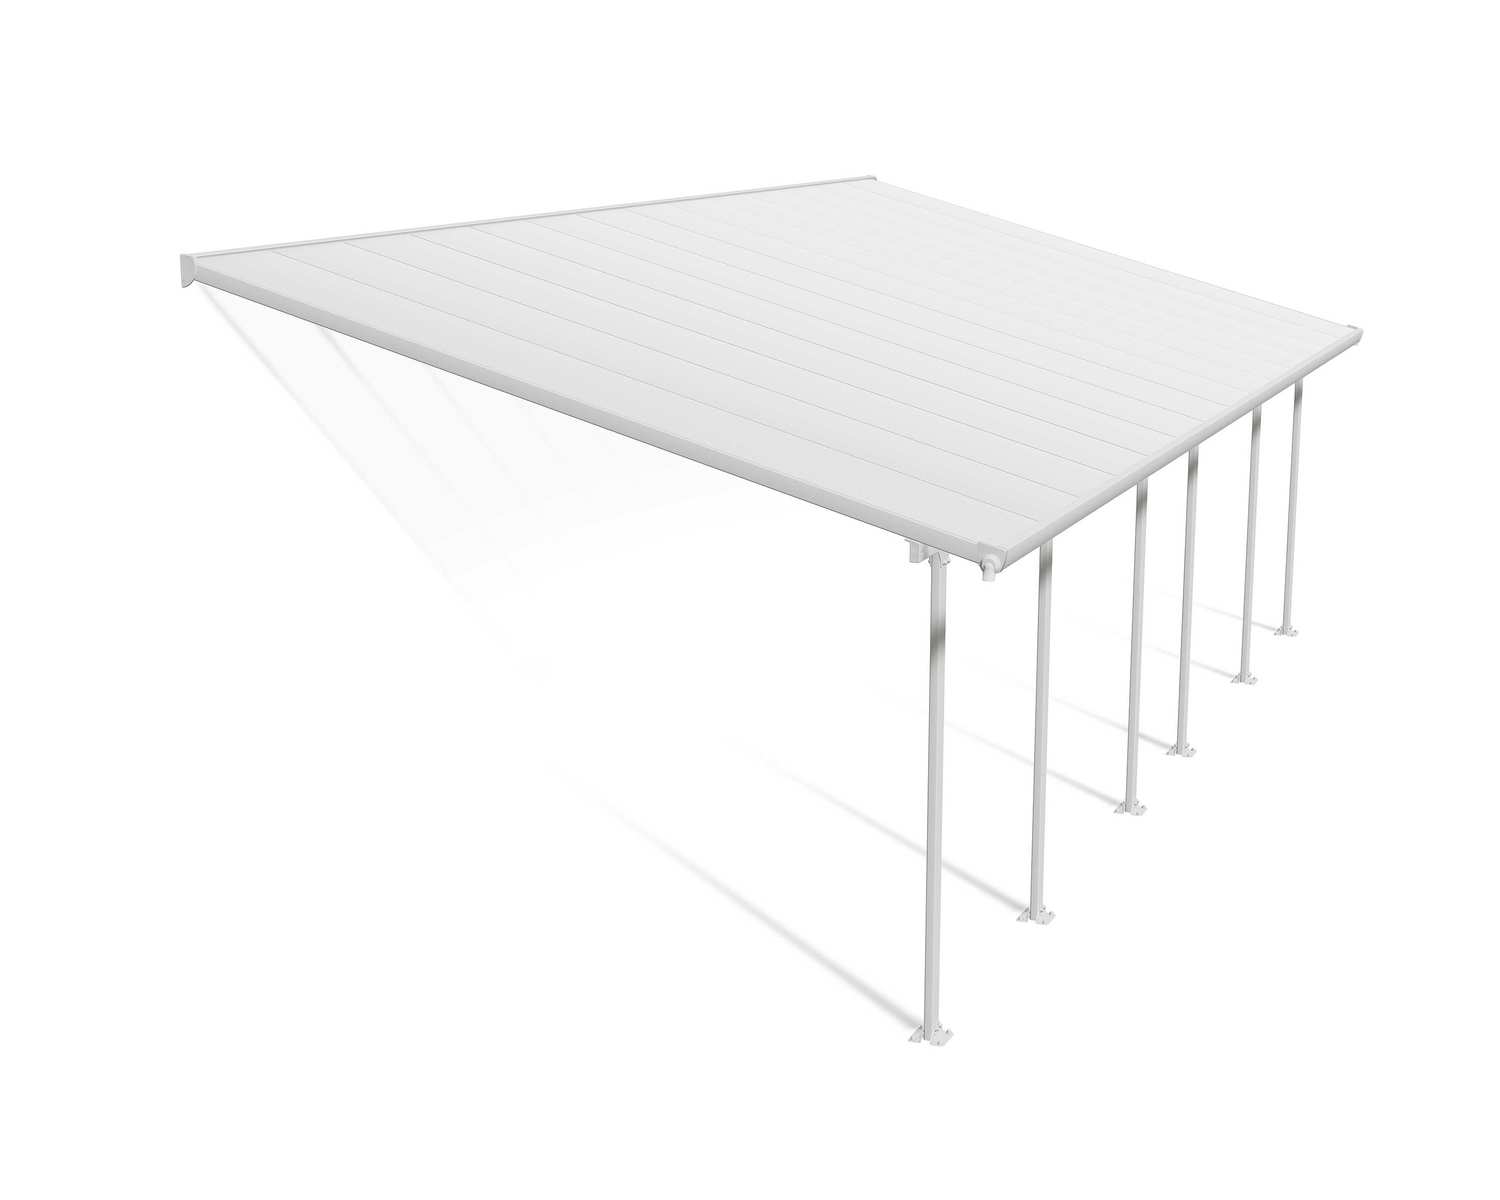 Feria 13 ft. x 28 ft. White Aluminium Patio Cover With 6 Posts, White Twin-Wall Polycarbonate Roof Panels.